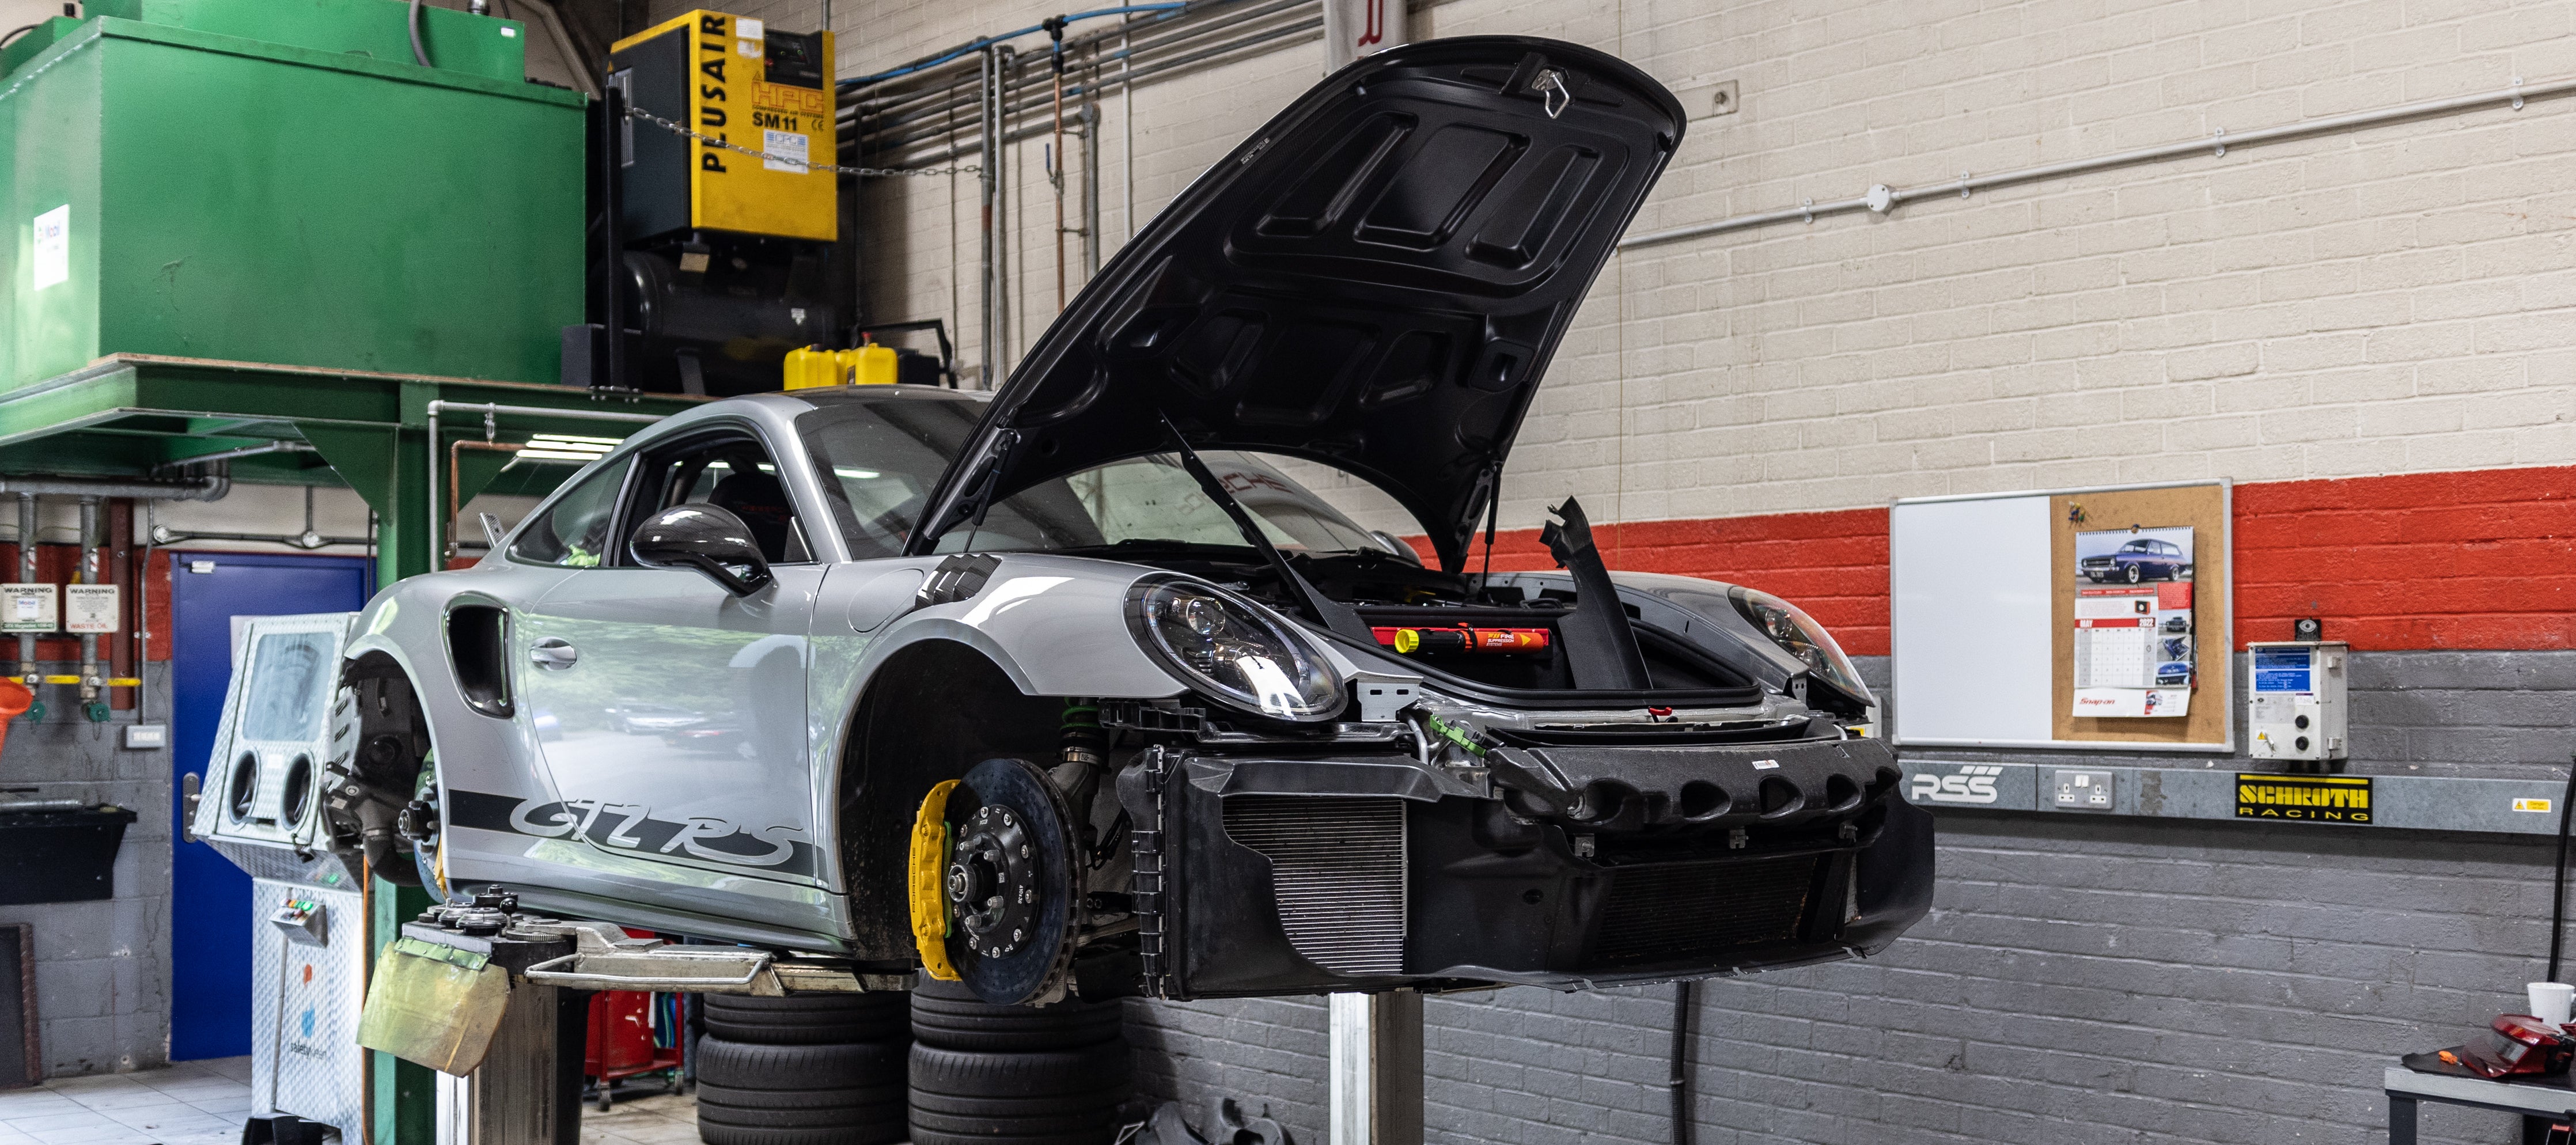 JCR GT2 RS / MANTHEY PERFORMANCE KIT INSTALL - DAY 2